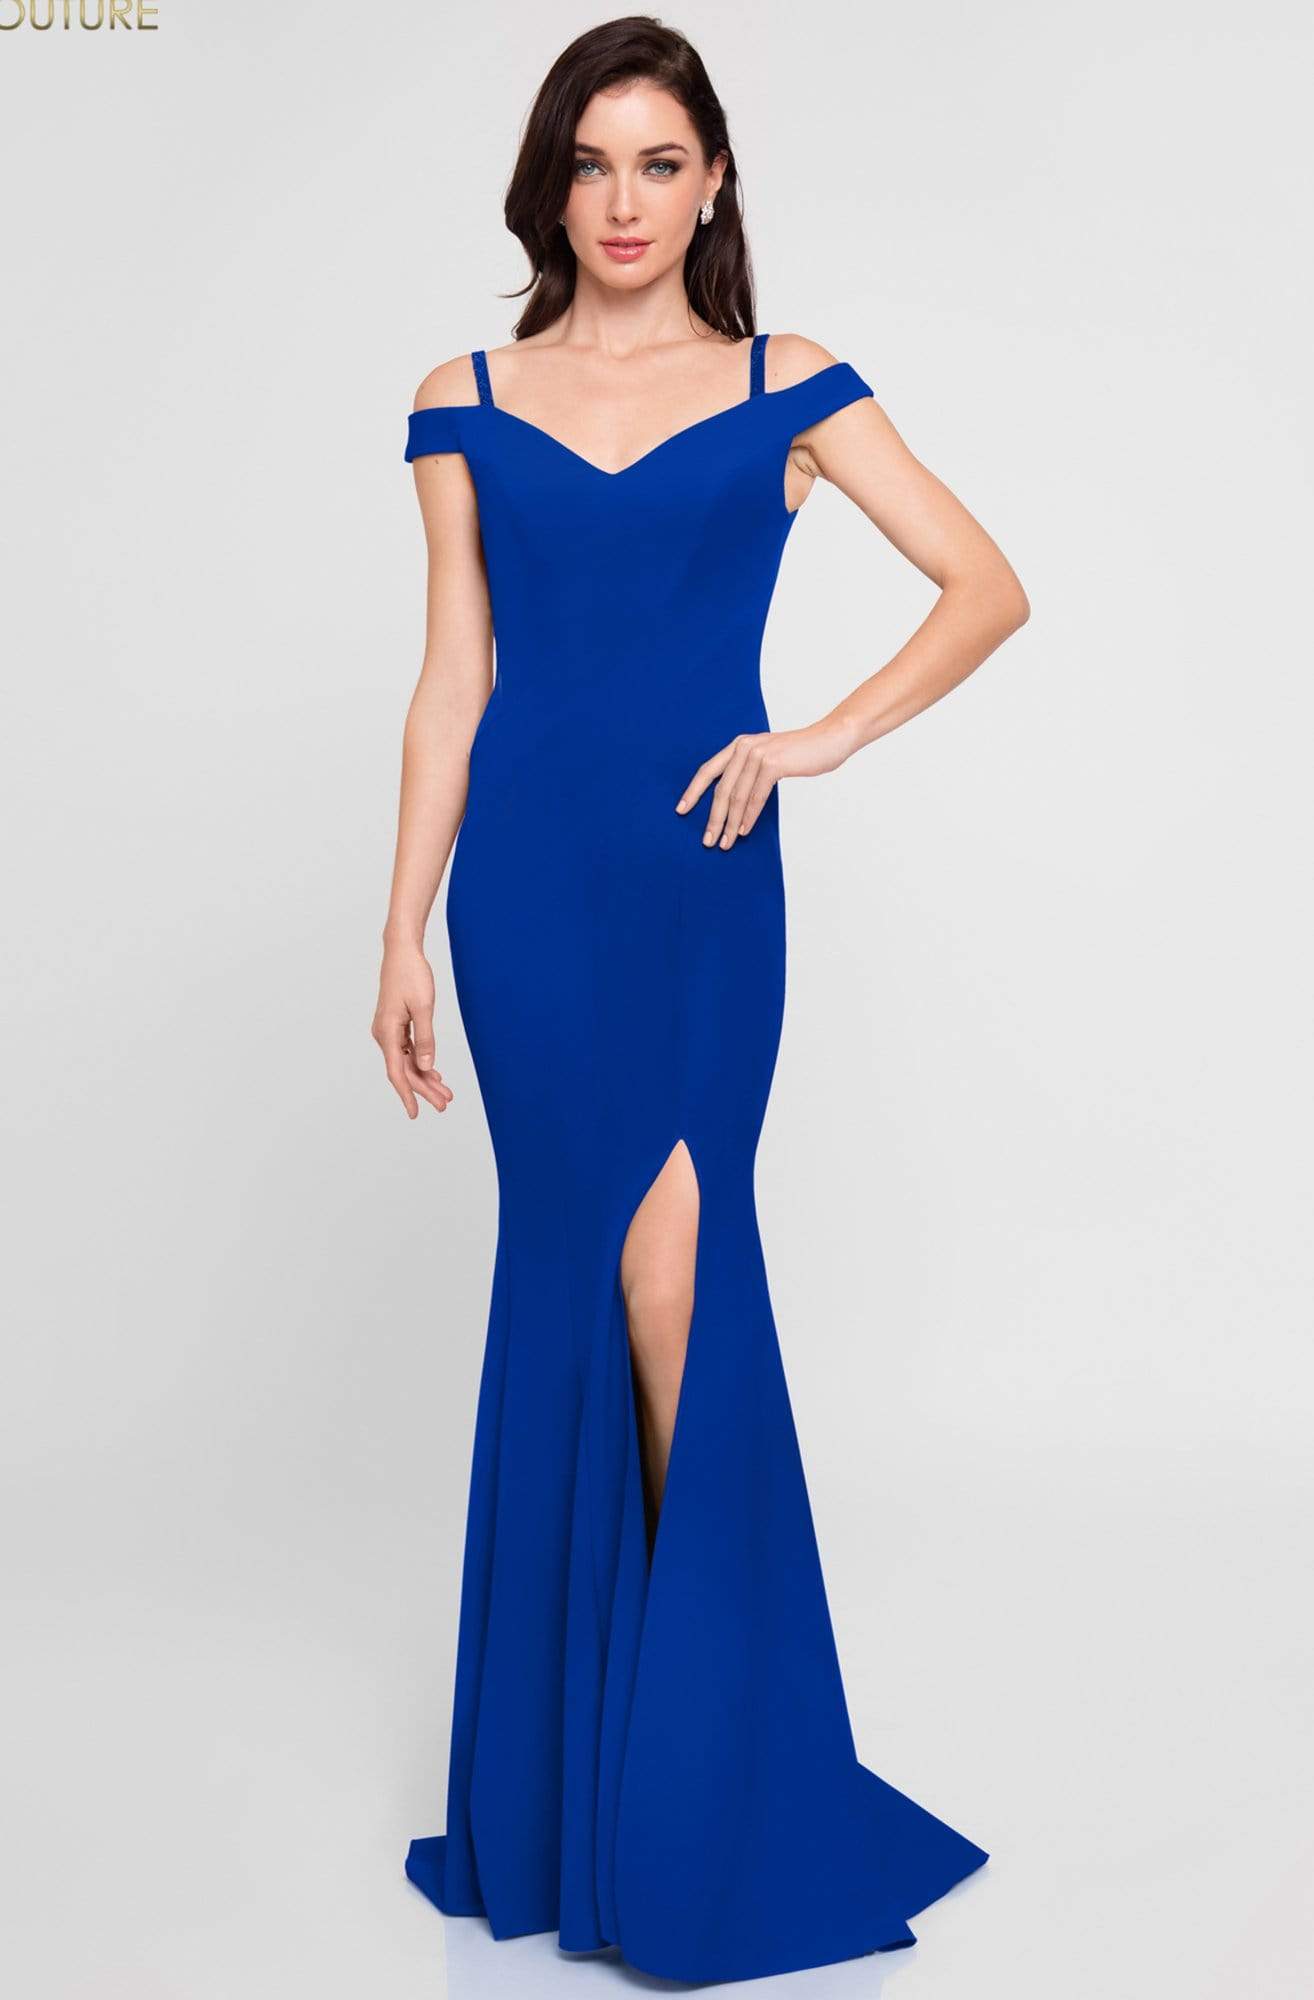 Terani Couture - 1813B5185 Sculpted Off Shoulder High Slit Sheath Gown Special Occasion Dress 00 / Royal